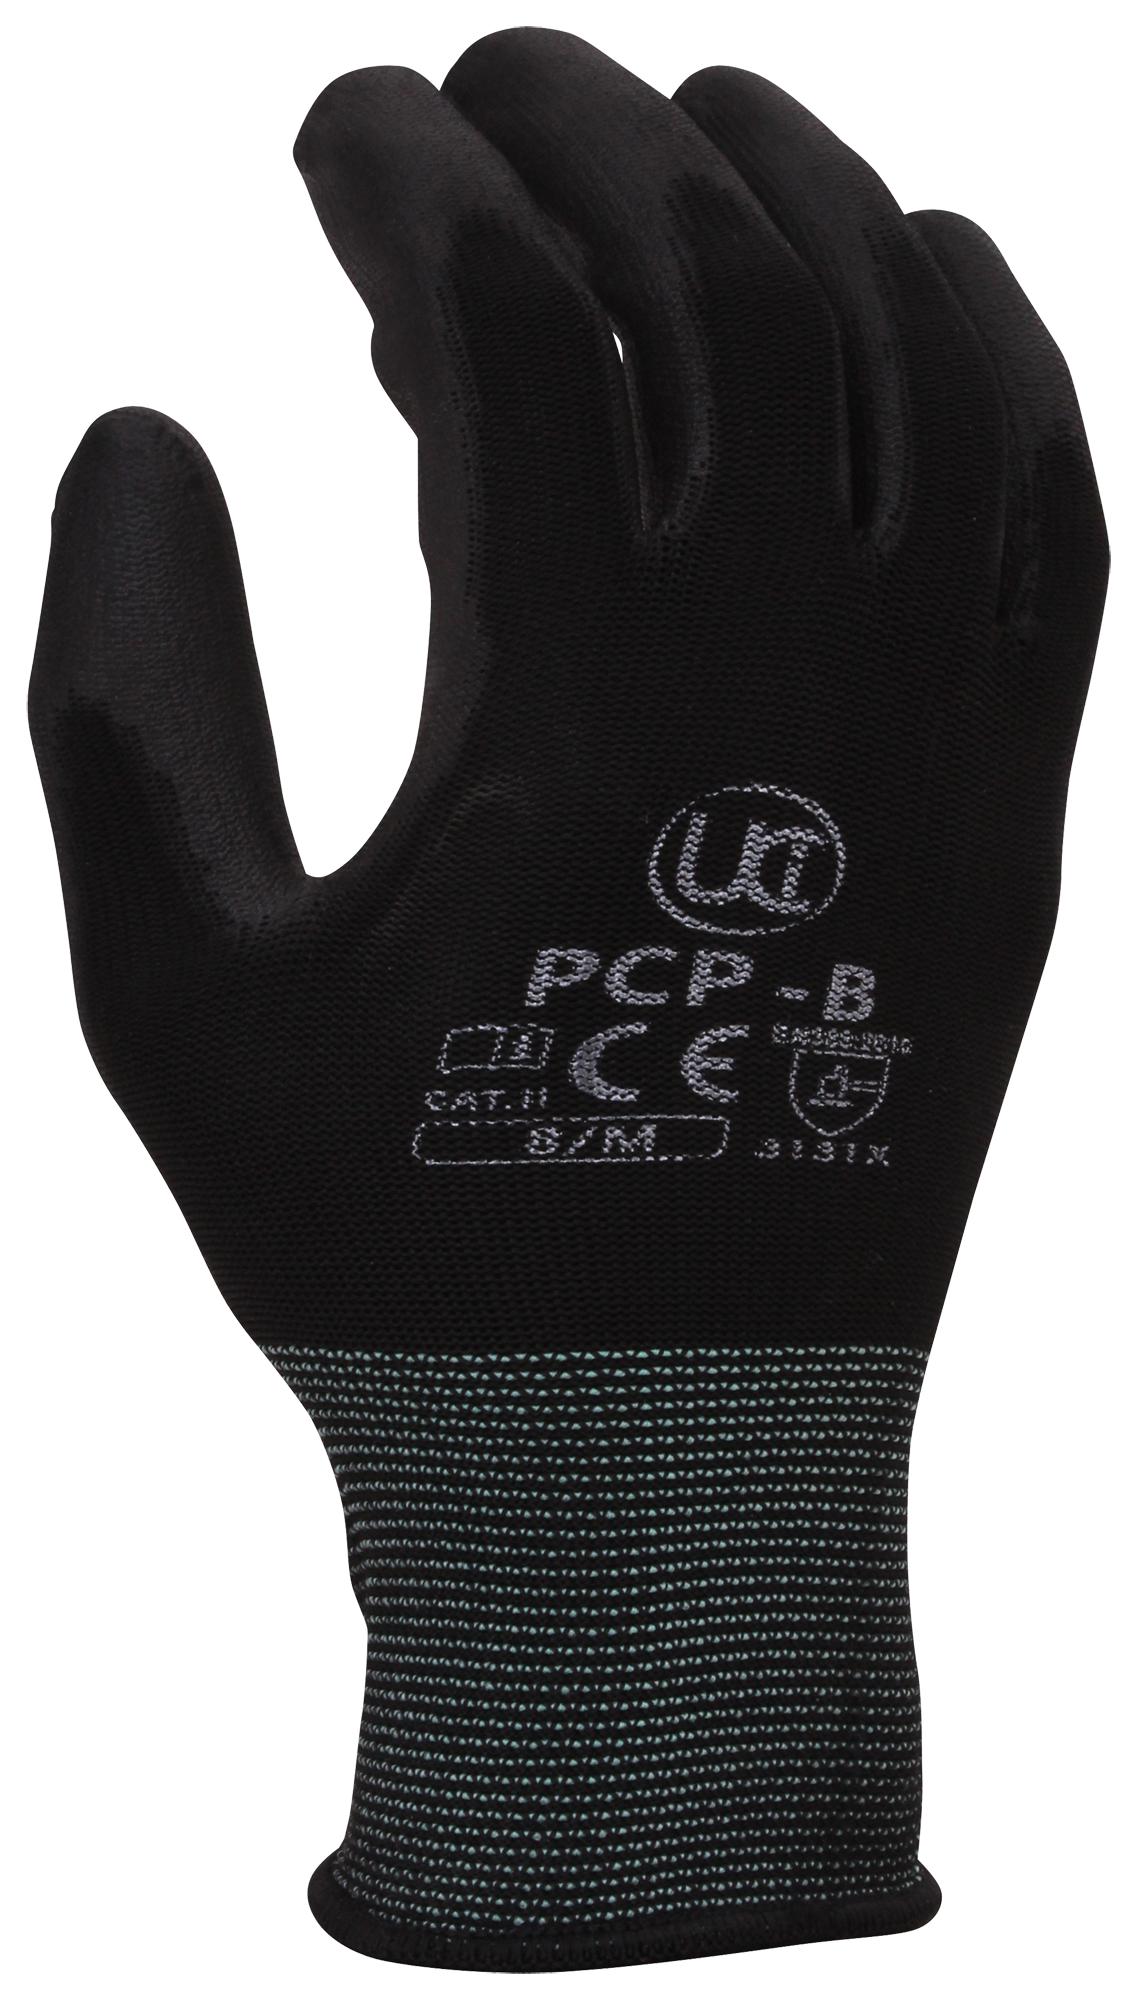 Uci G/pcp-B/09 Gloves, Pu Coated Polyester, Black, L